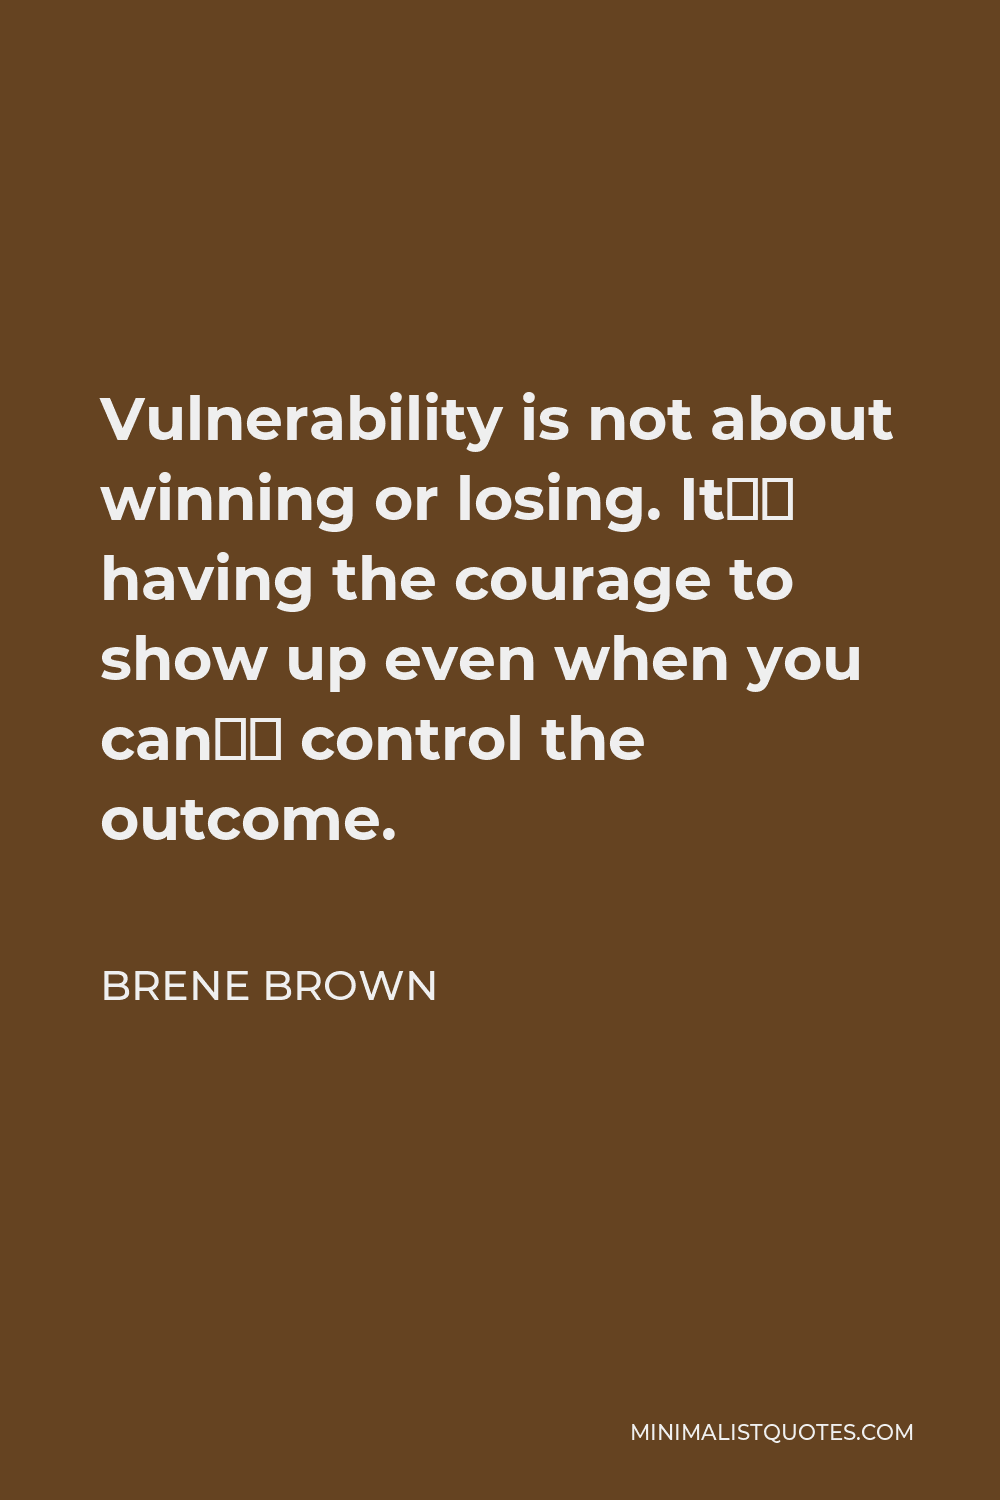 Brene Brown Quote - Vulnerability is not about winning or losing. It’s having the courage to show up even when you can’t control the outcome.